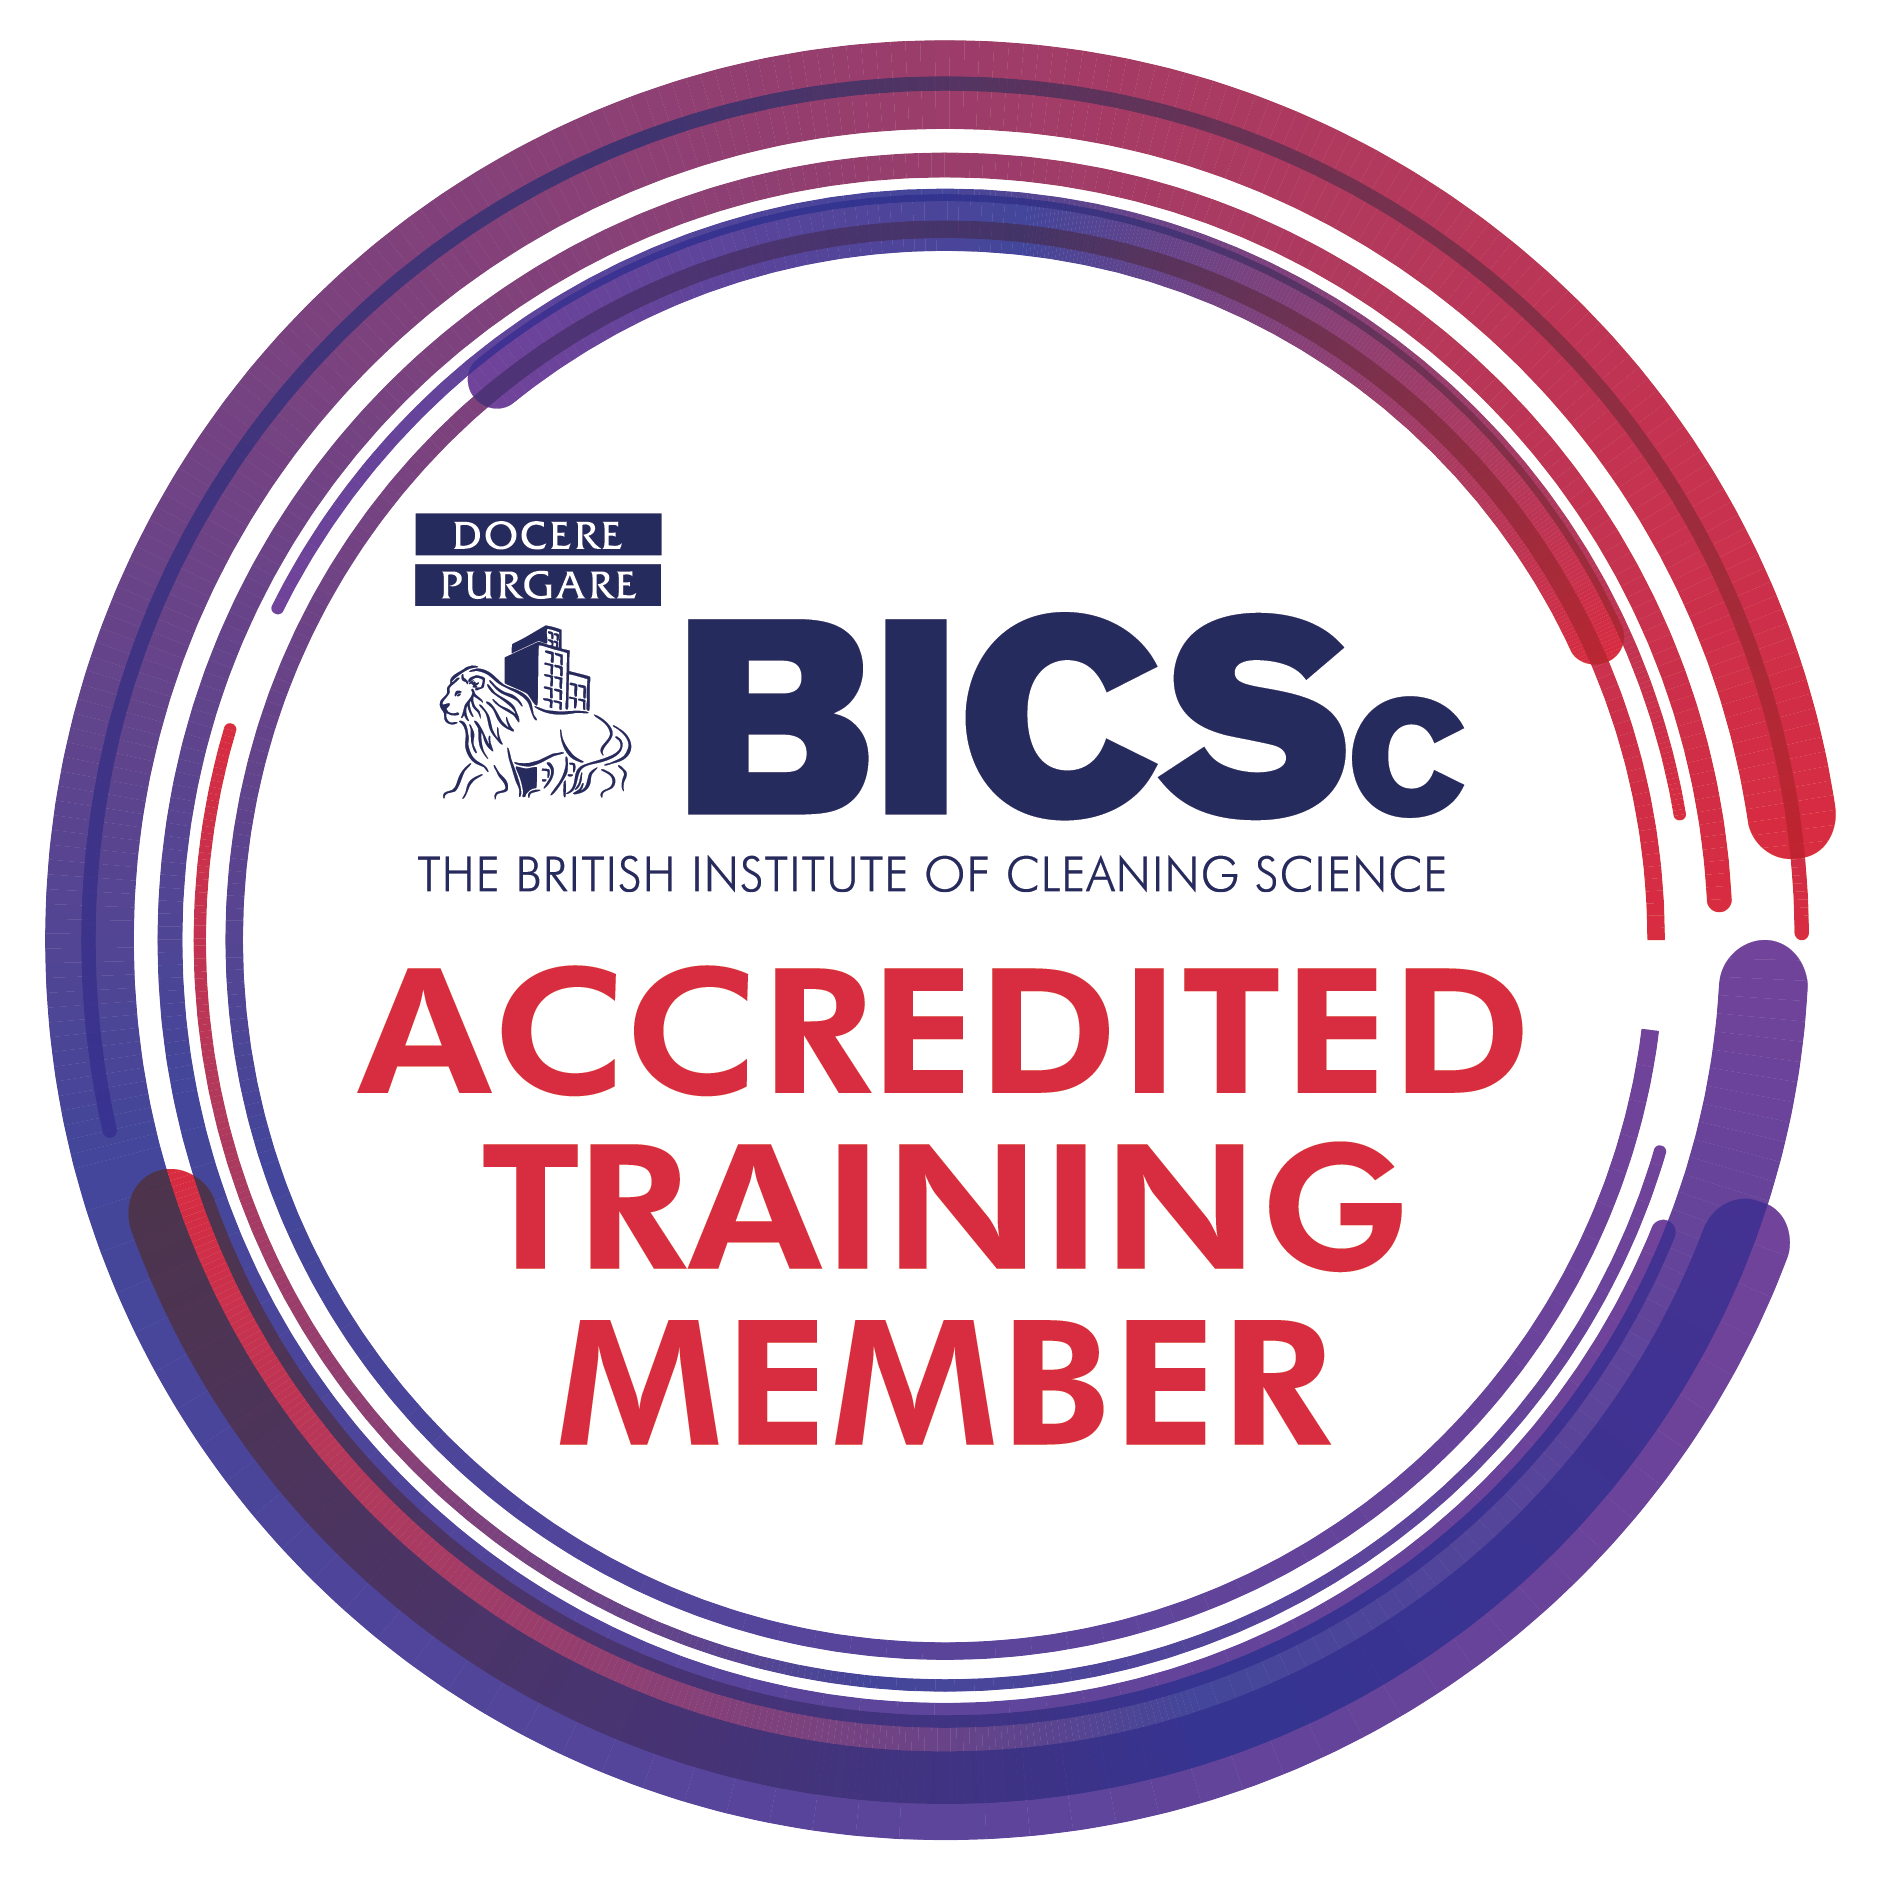 British Institute of Cleaning Science Accredited Training Member